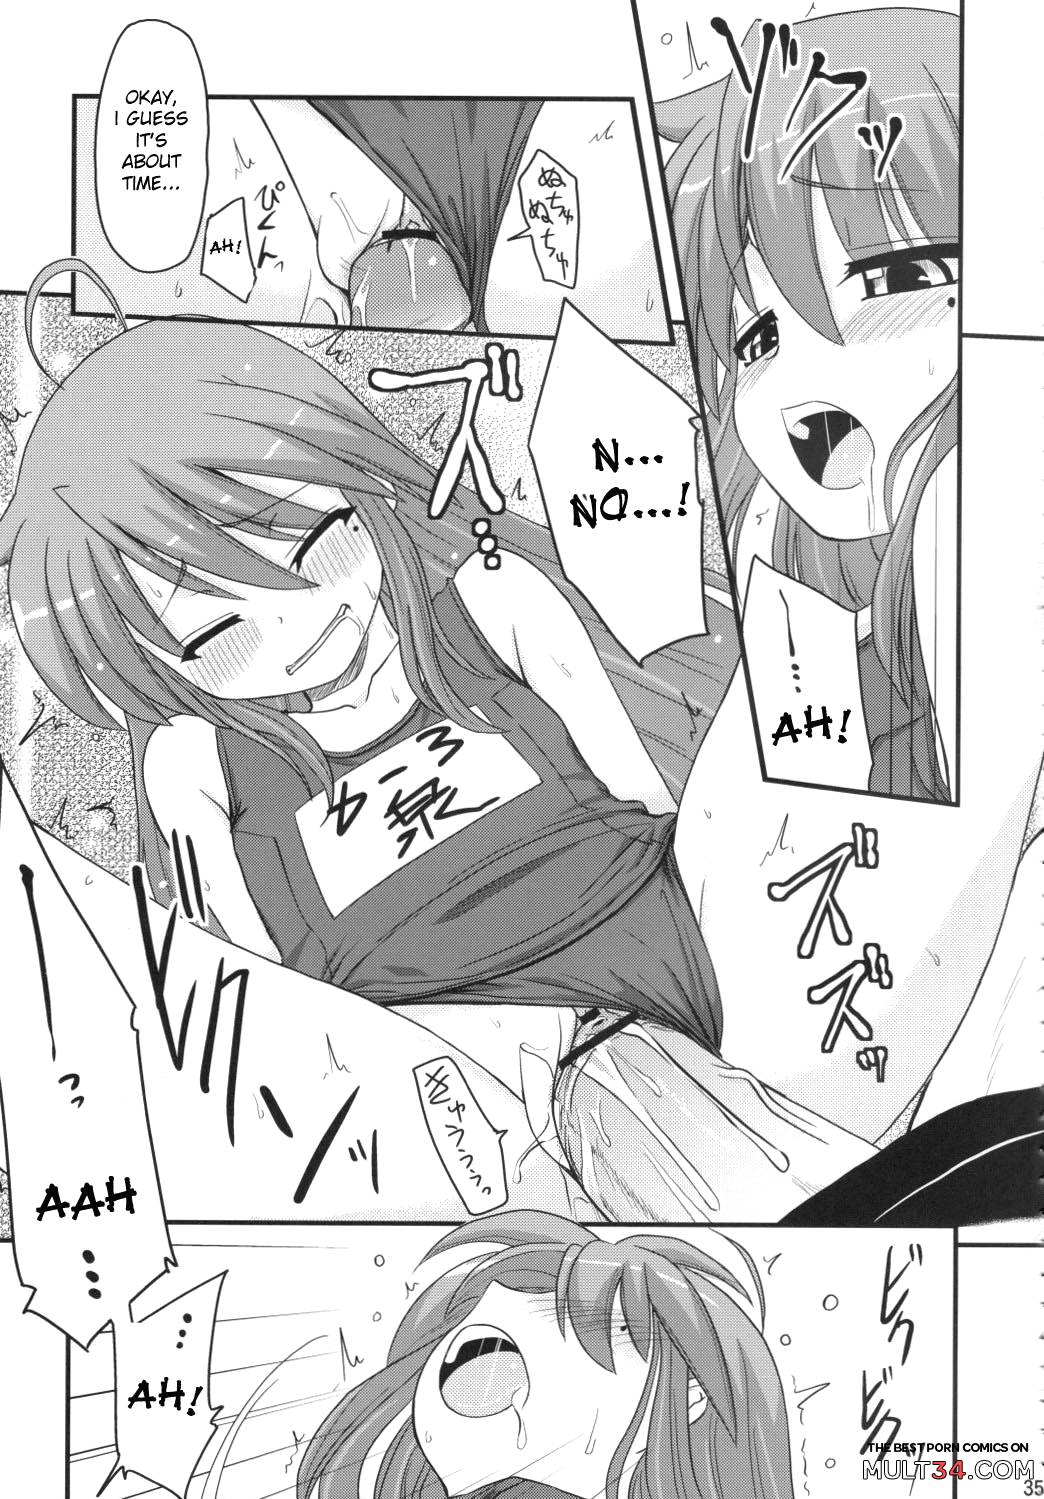 Konata and Oh-zu 4 people each and every one + 1 page 31